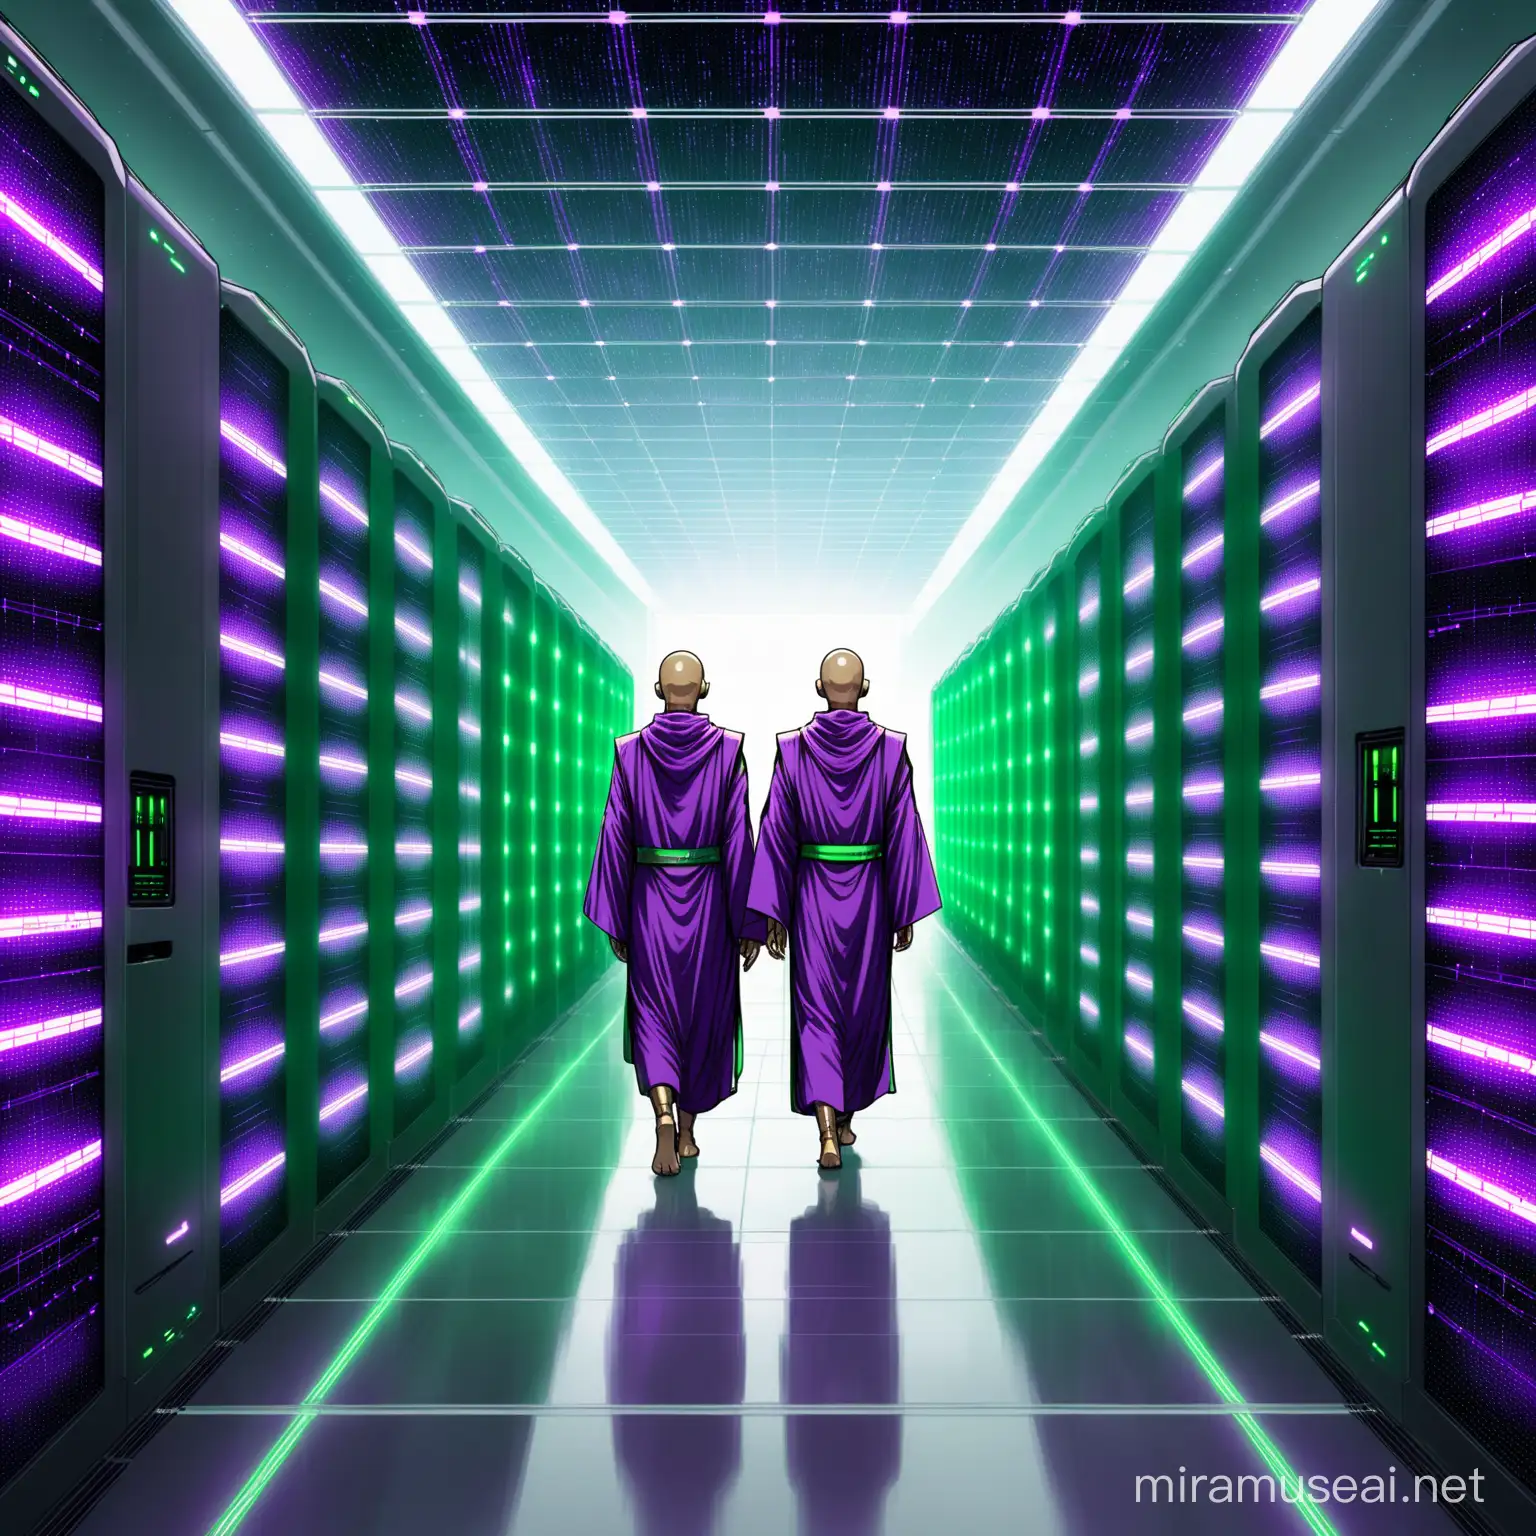 futuristic android human hybrid monks in purple & green robes walking in a natural solarpunk data center